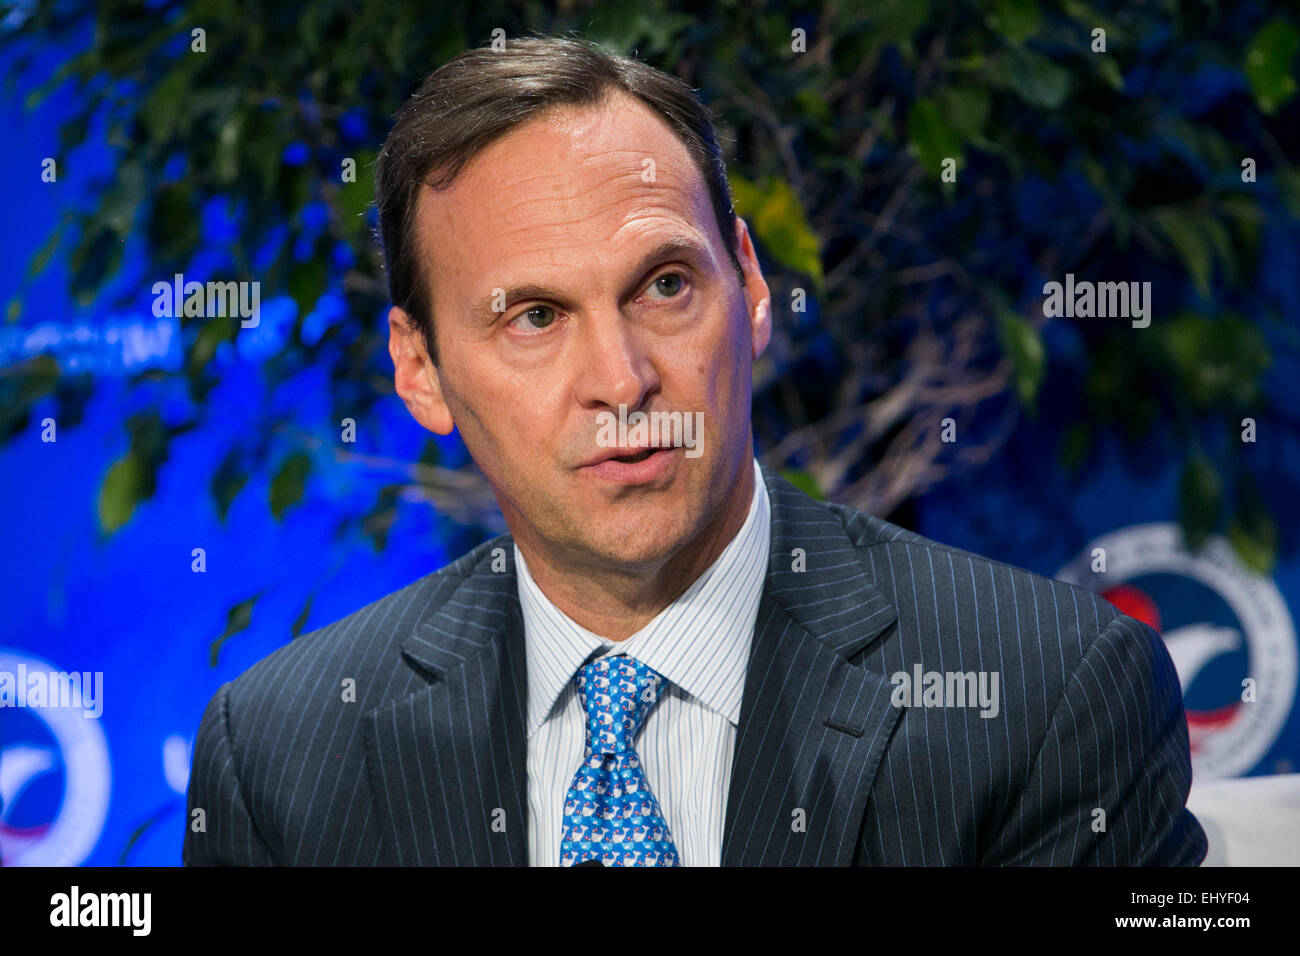 Washington, DC, USA. 17th Mar, 2015. David N. Siegel, CEO, Frontier Airlines, speaks at the 14th annual U.S. Chamber Of Commerce Foundation Aviation Summit in downtown Washington, D.C., on March 17, 2015. Credit:  Kristoffer Tripplaar/Alamy Live News Stock Photo